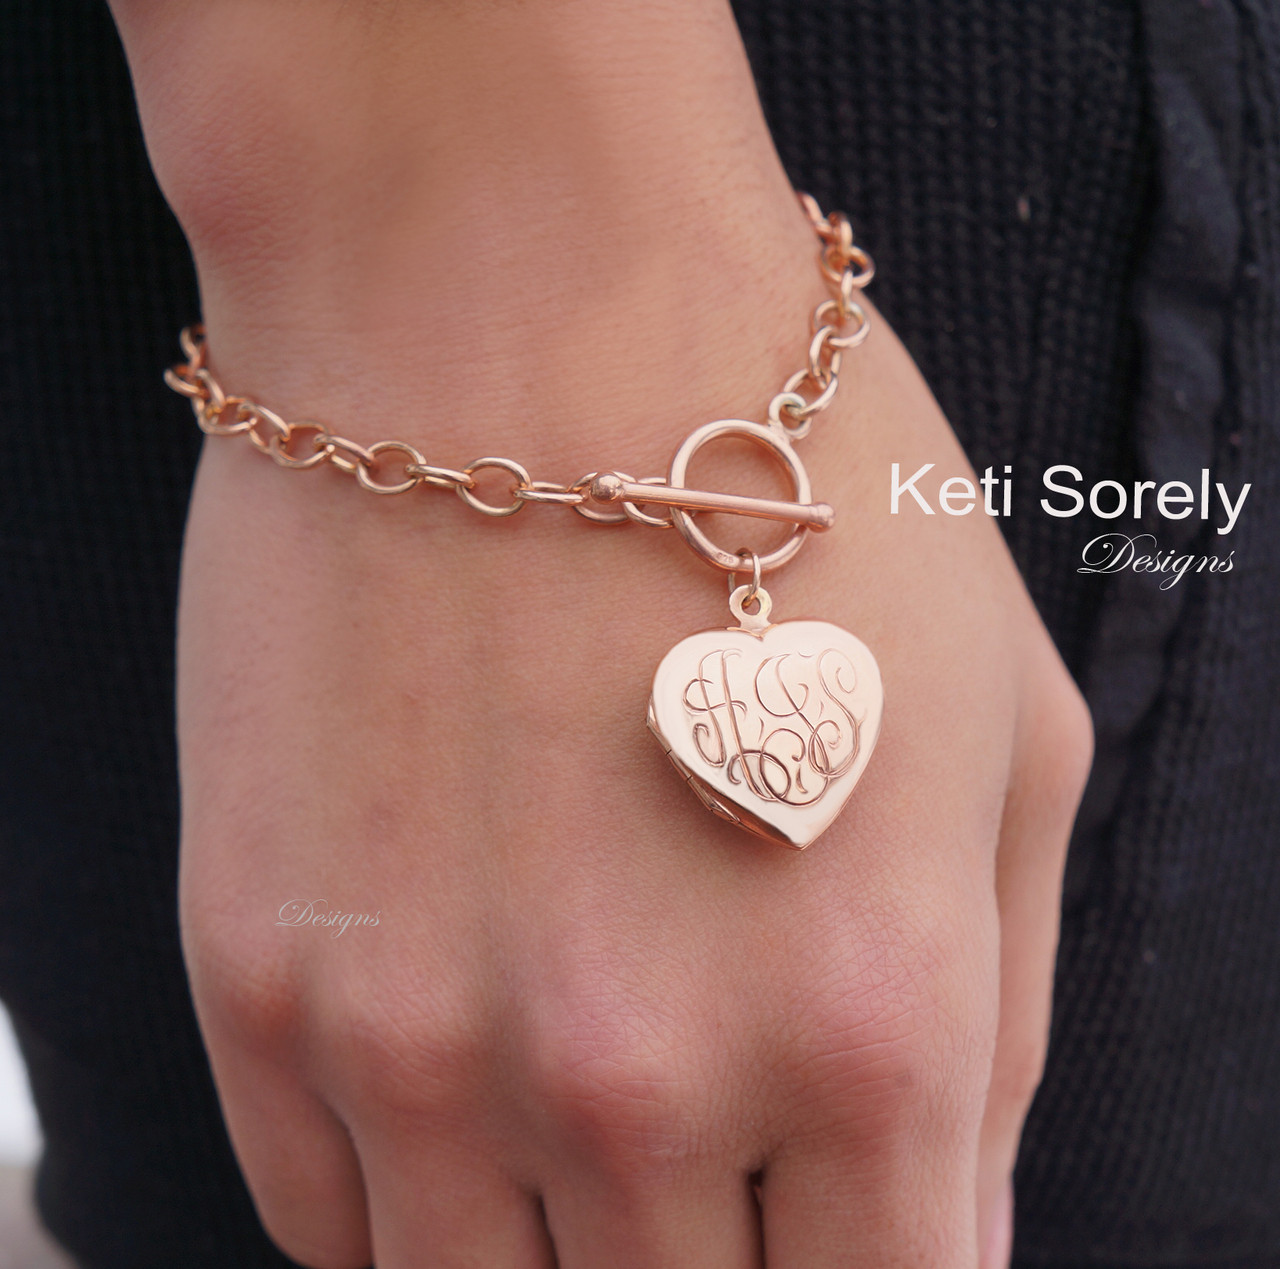 Personalized locket bracelet with hand engraved monogram initials